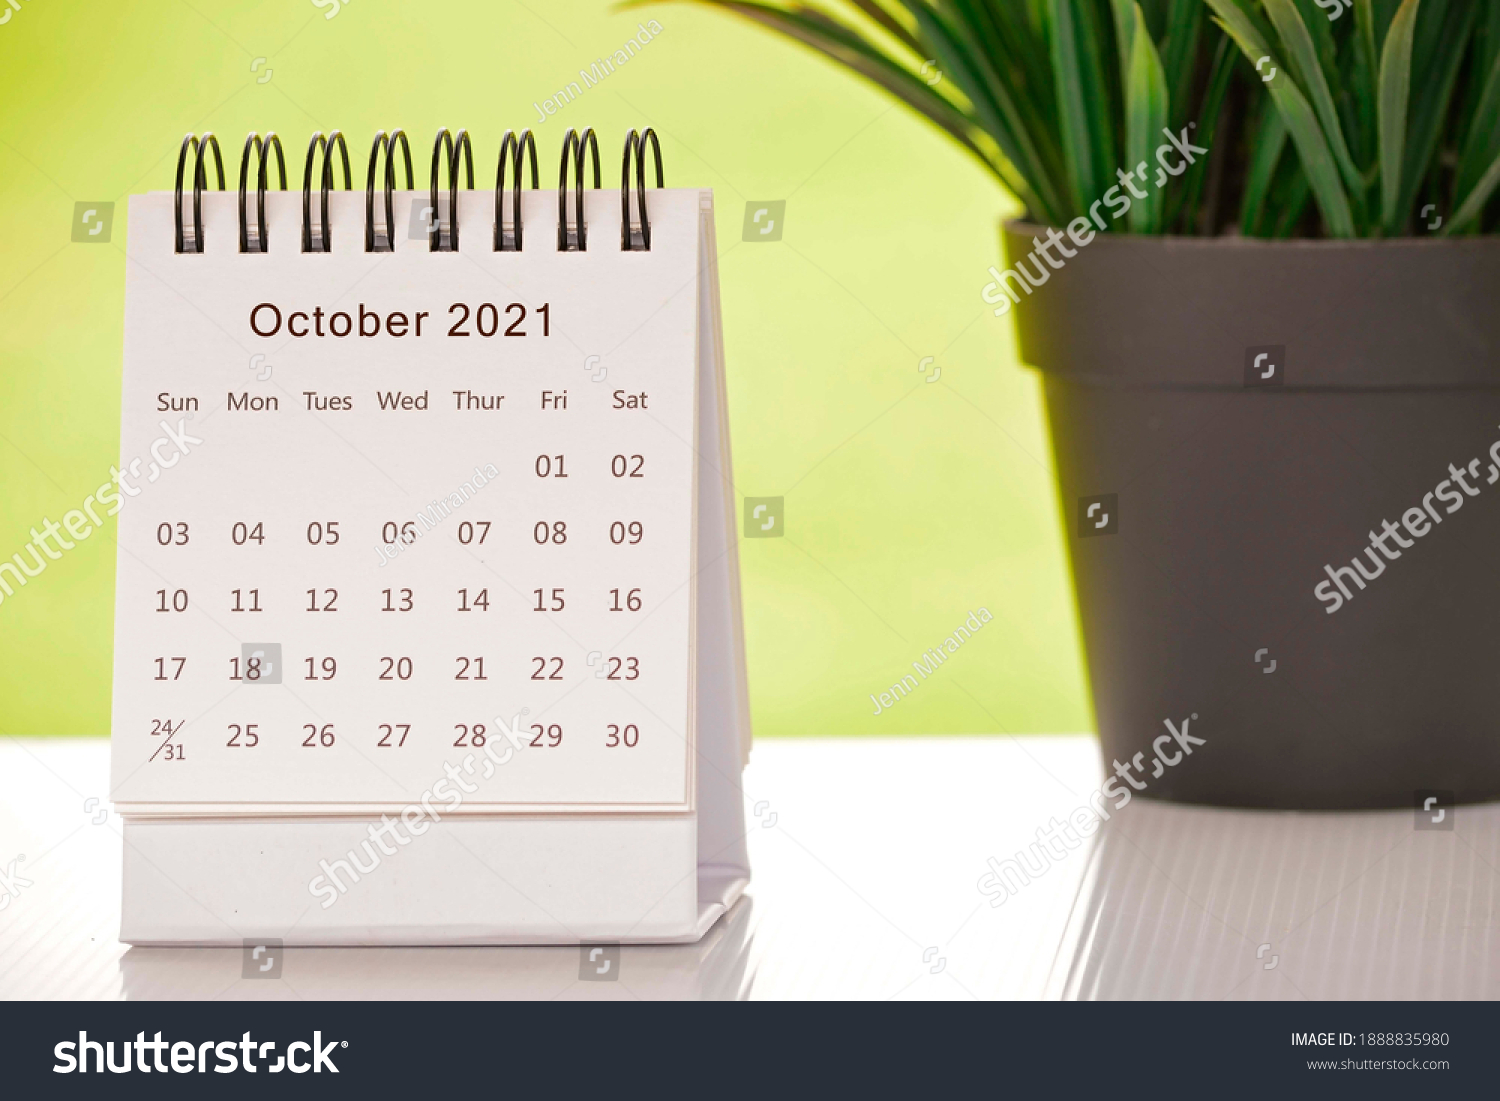 White October 2021 calendar with green backgrounds and potted plant. 2021 New Year Concept #1888835980